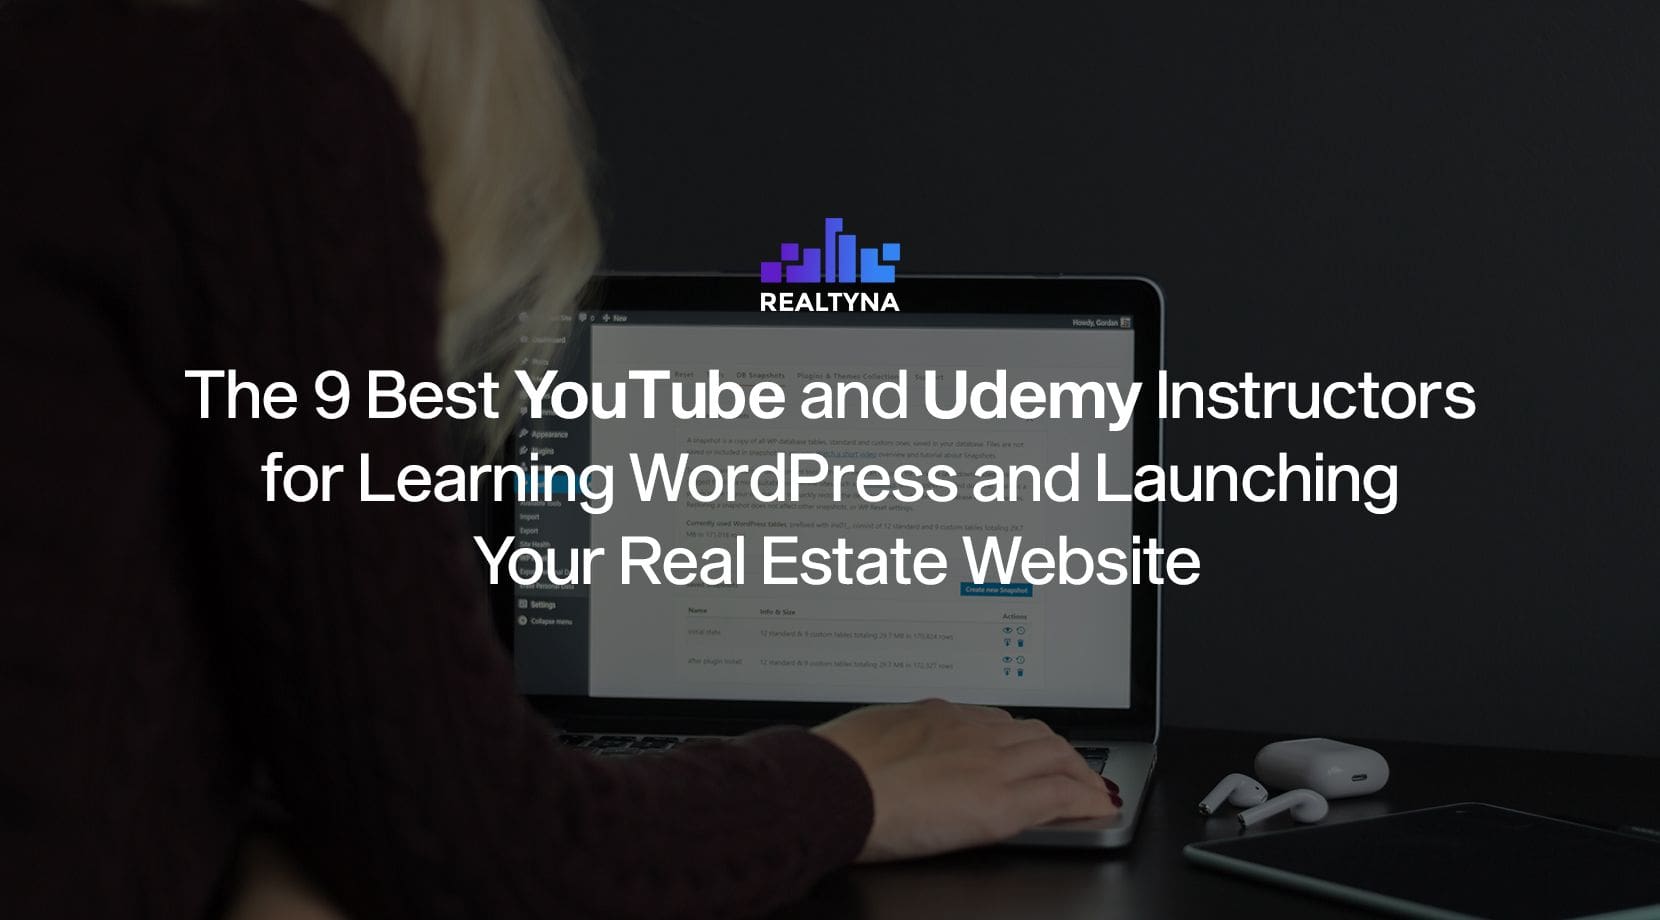 The 9 Best YouTube and Udemy Instructors for Learning WordPress and Launching Your Real Estate Website